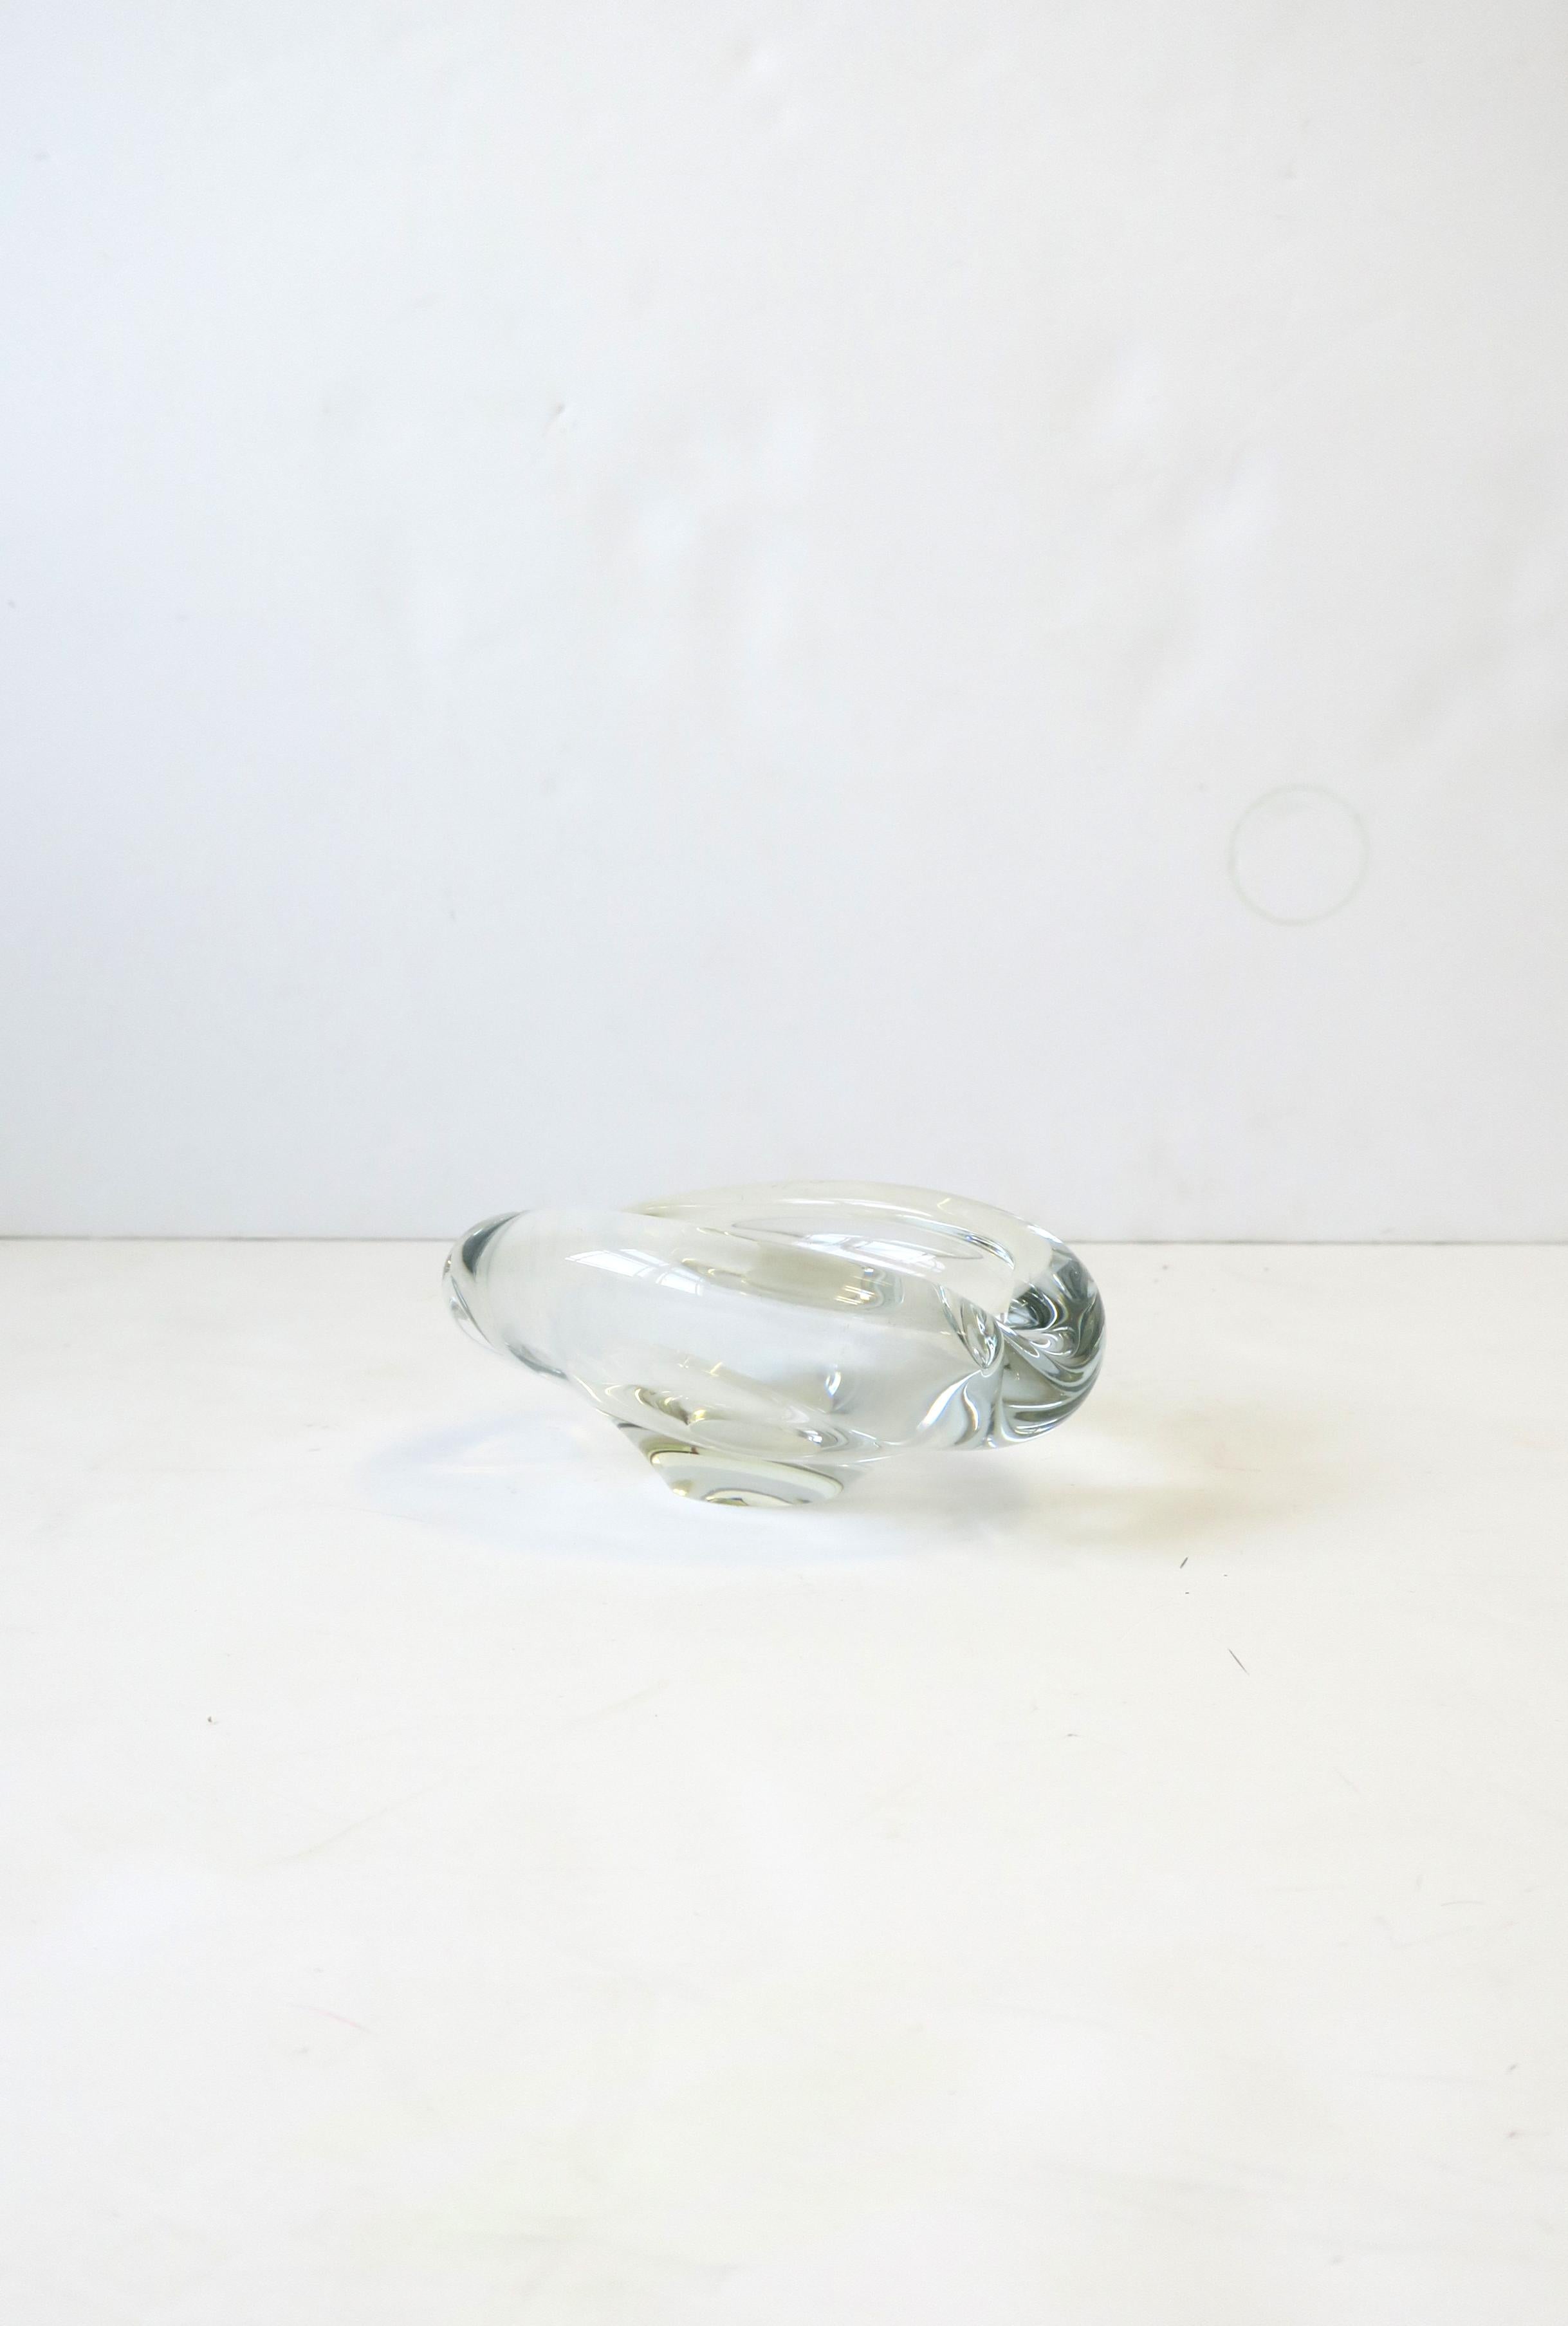 Scandinavian Modern Art Glass Bowl or Ashtray by Holmegaard, 1958 In Good Condition For Sale In New York, NY